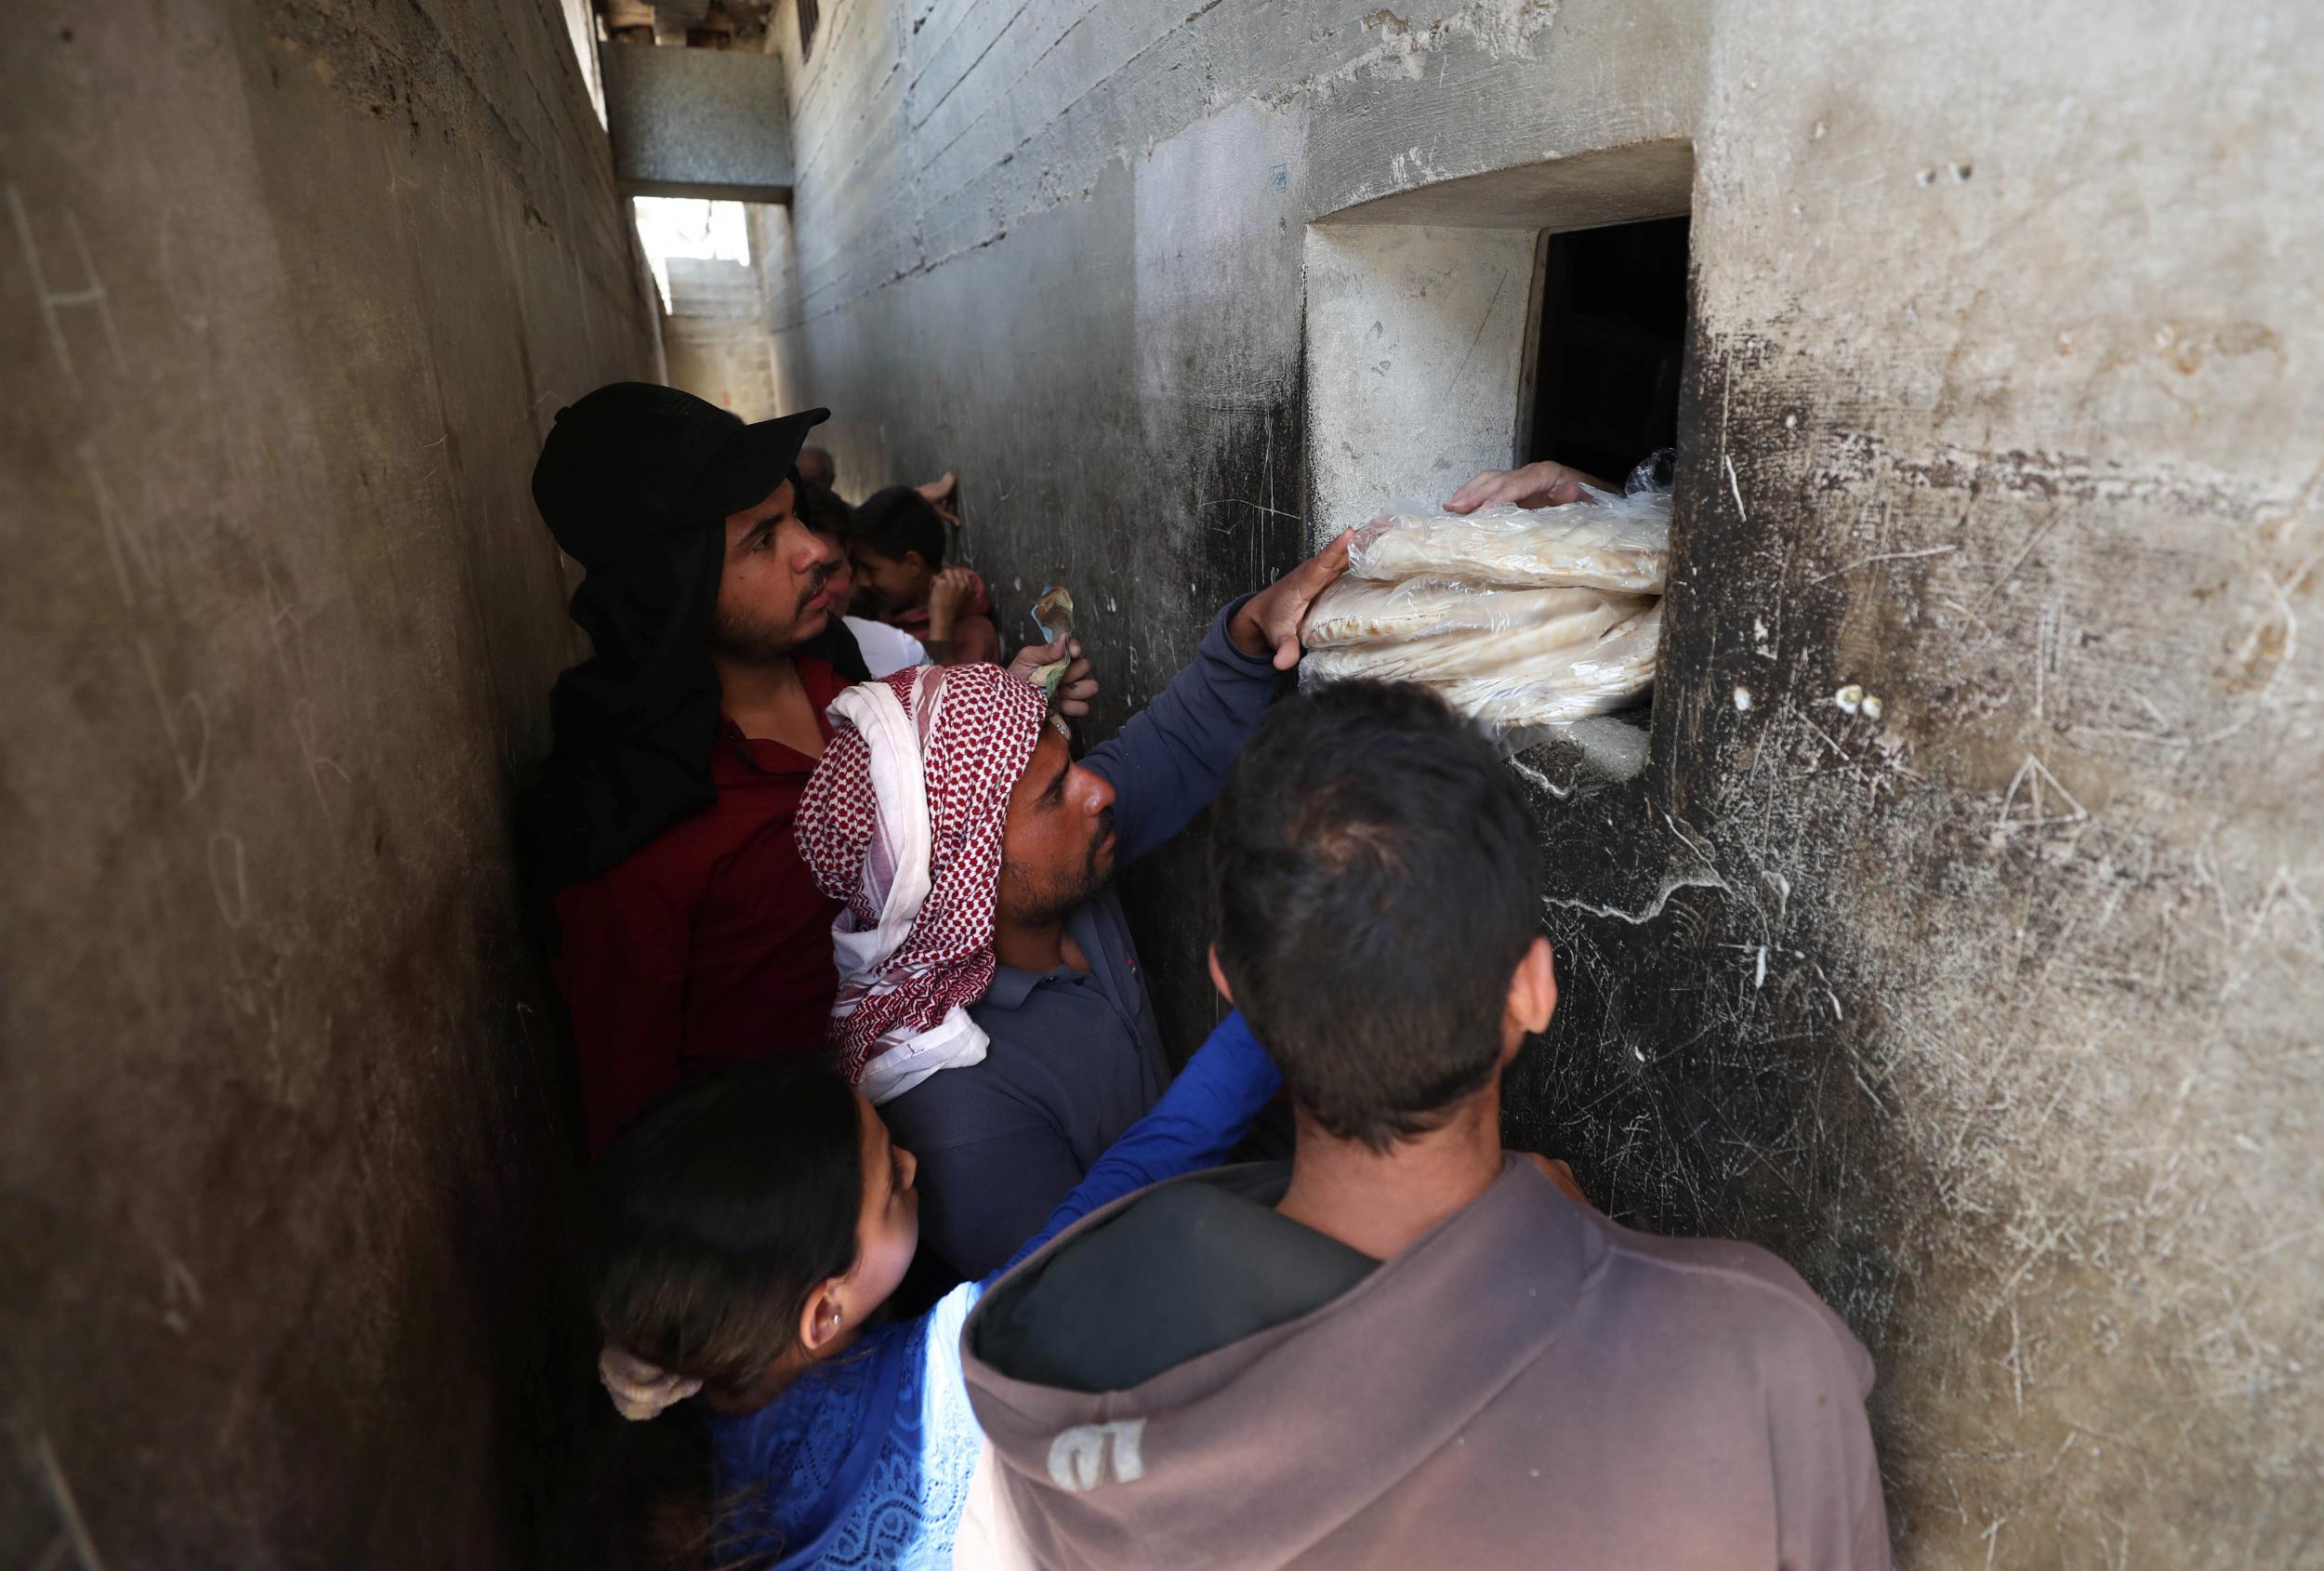 Syrians buy bread at a shop in the town of Binnish in the country's northwestern Idlib province on June 9, 2020 as Syrians held a third day of rare anti-regime protests over deteriorating living conditionsin the government-held city of Sweida